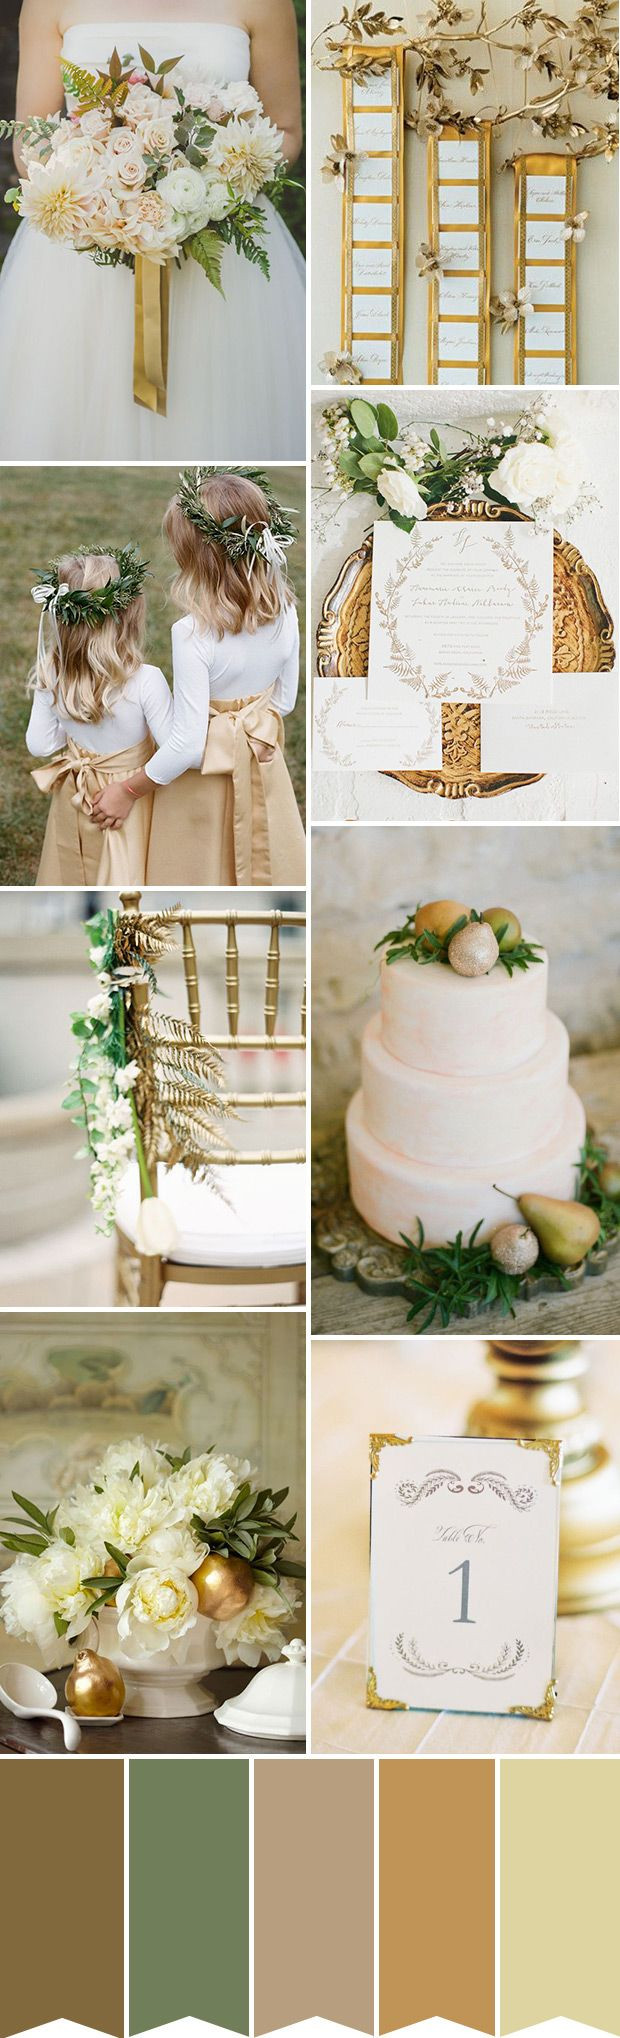 Country Wedding Color Schemes
 Popular Rustic Wedding Themes 2015 – BLOG